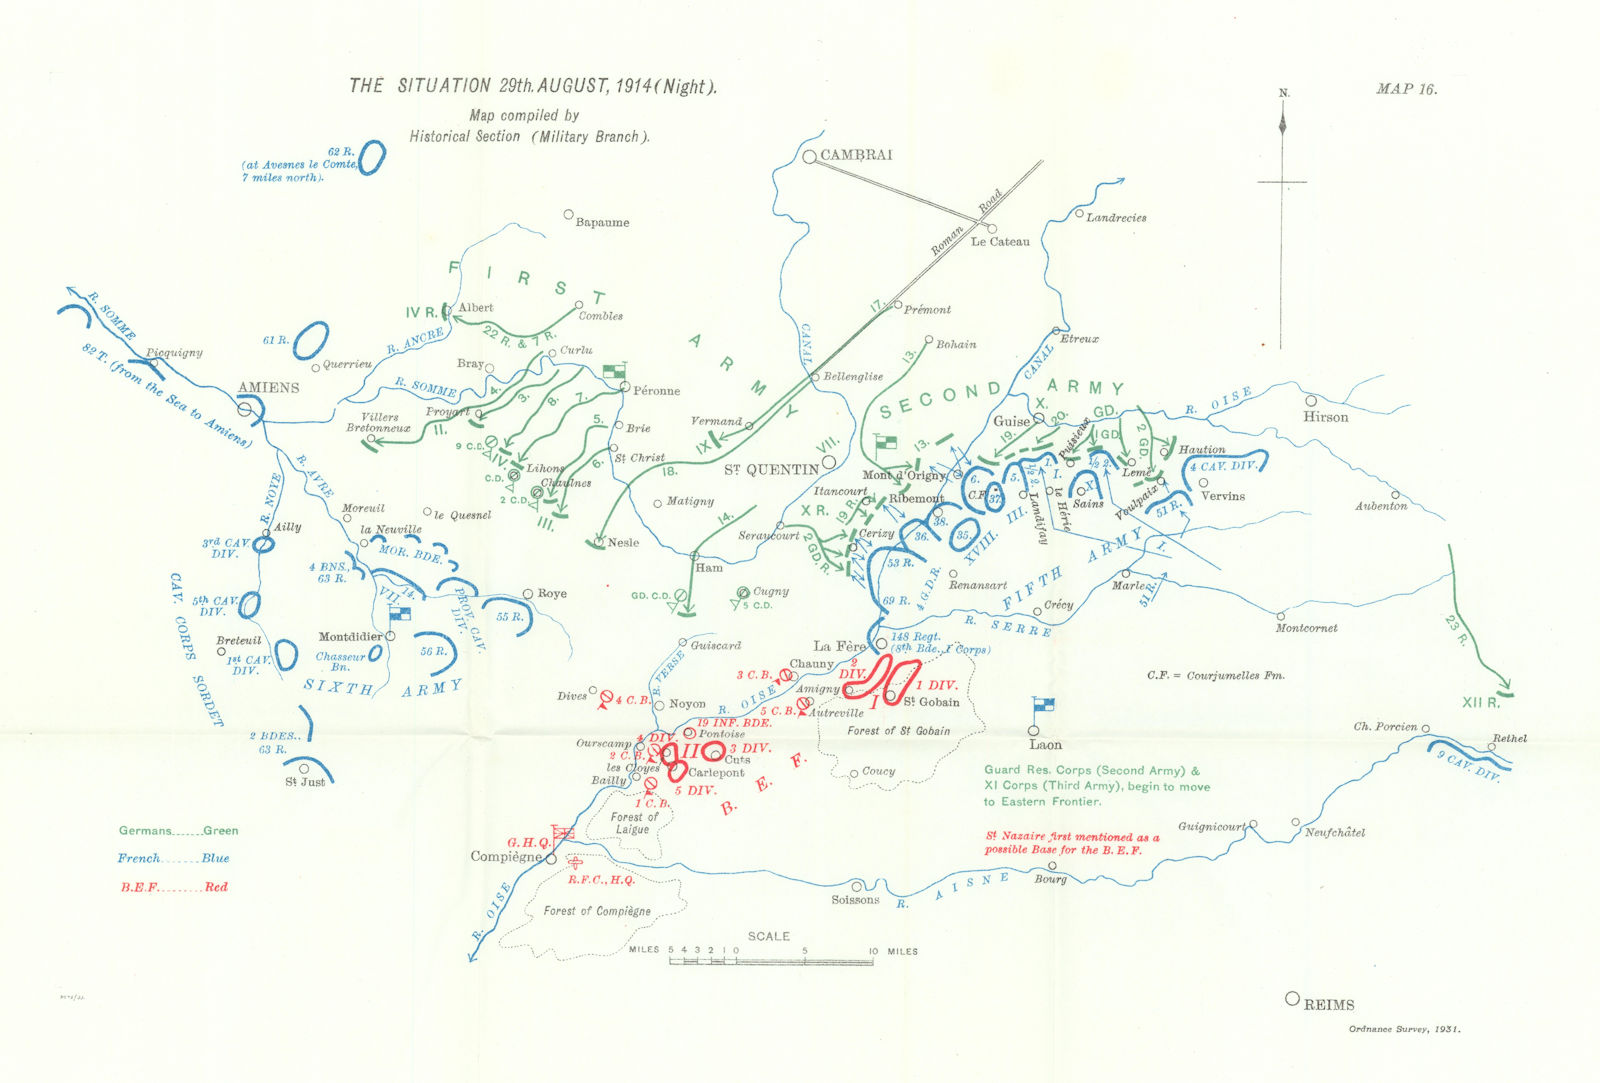 Great Retreat. Western Front 29th August 1914 night. First World War. 1933 map